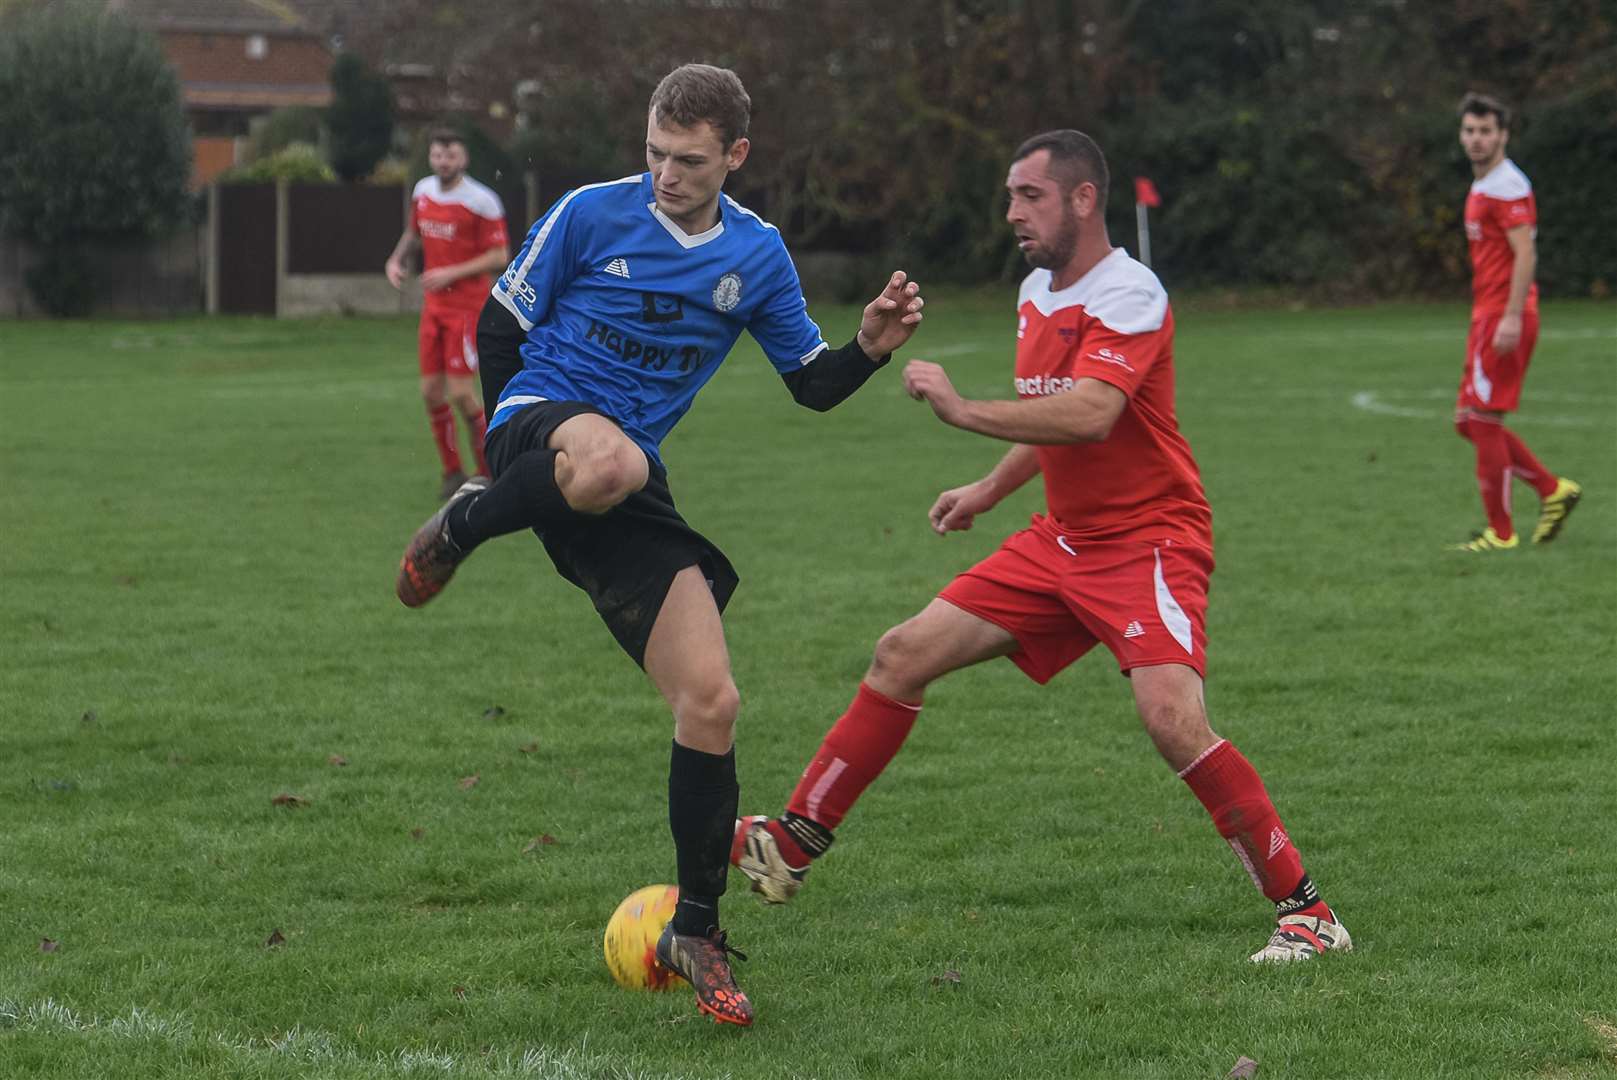 Bay United (Blue) up against The Druids (Red) in the Herne Bay & Whitstable Sunday League Picture: Alan Langley